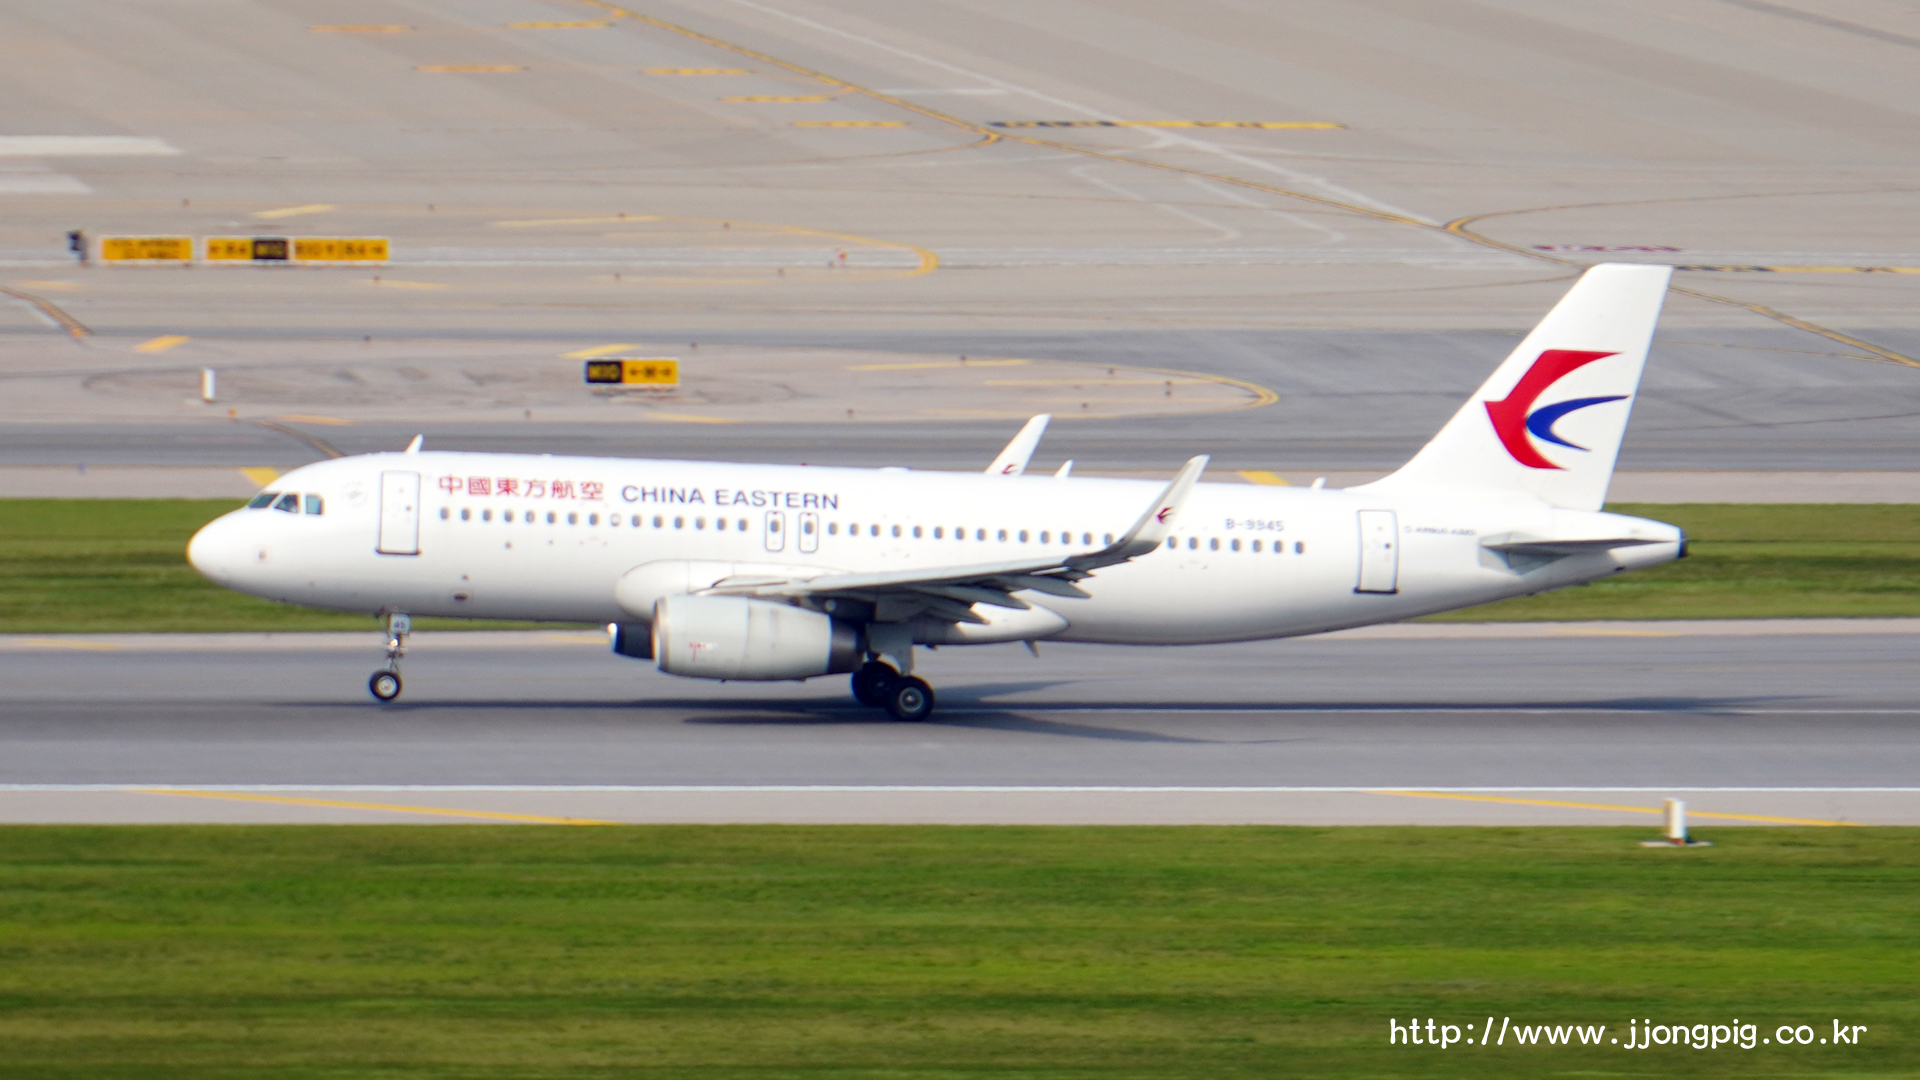 China Eastern Airlines B-9945 Airbus A320-200